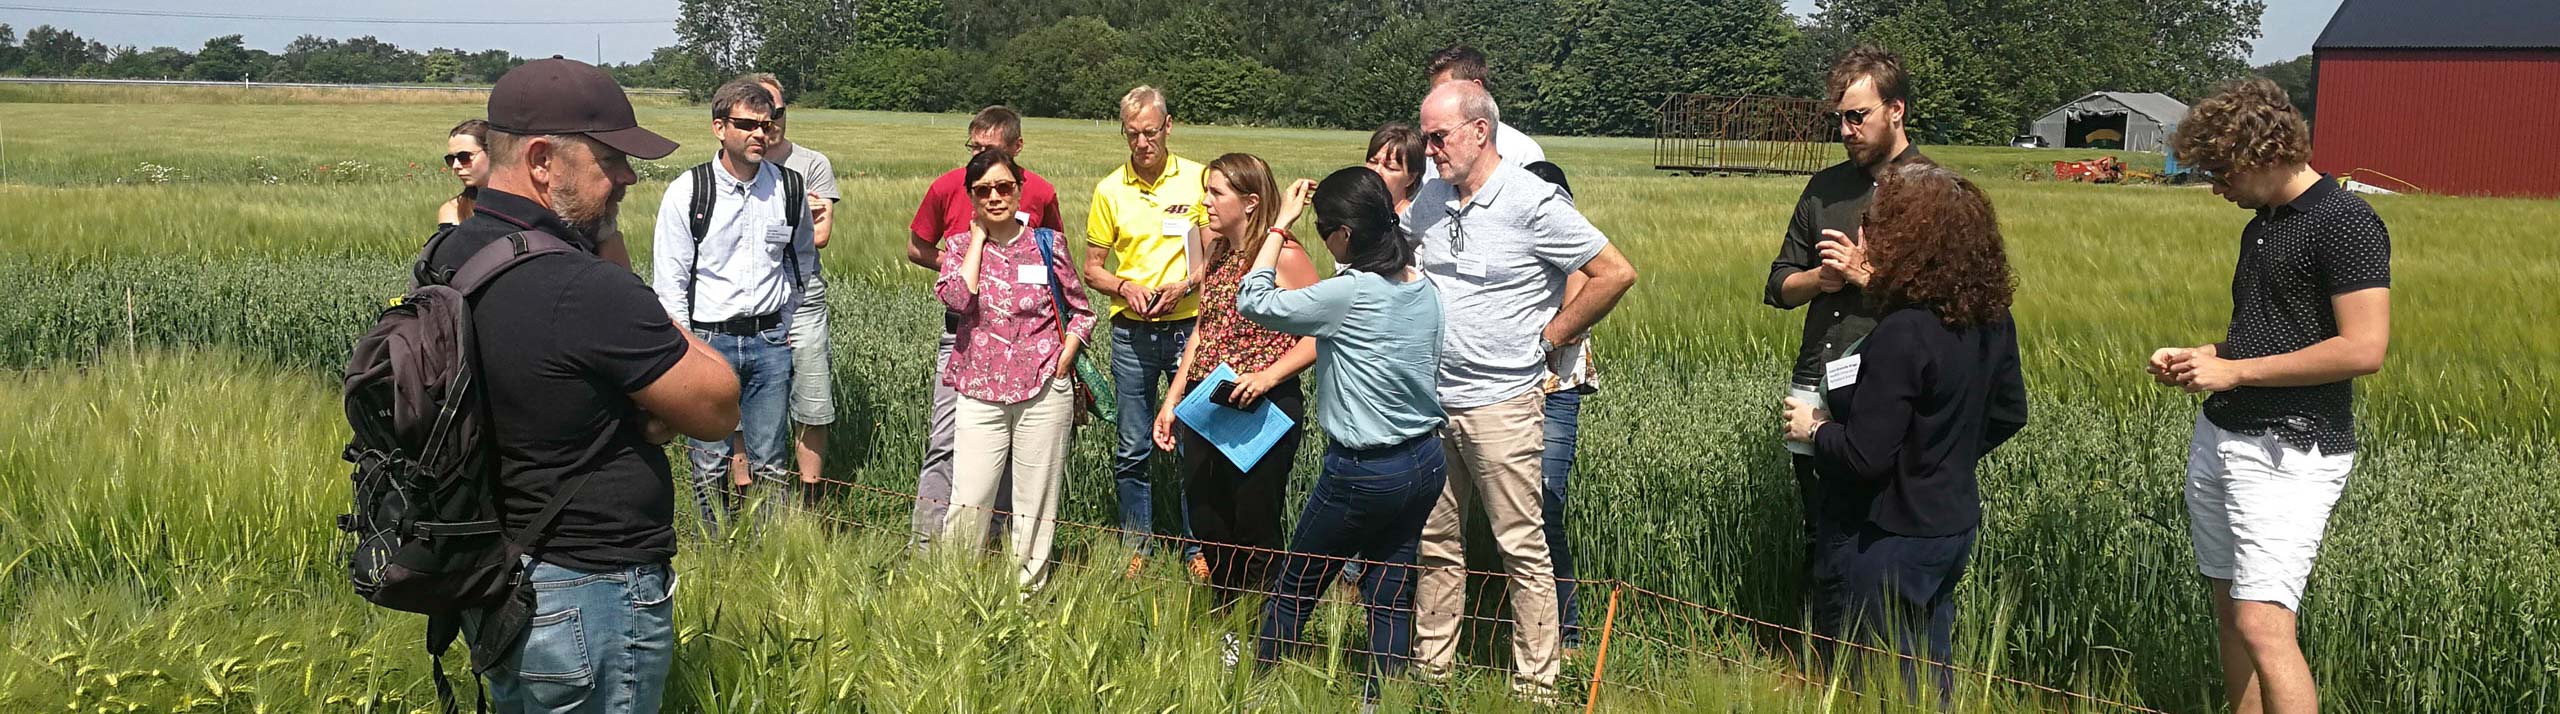 A group of people standing in a field with cereals.